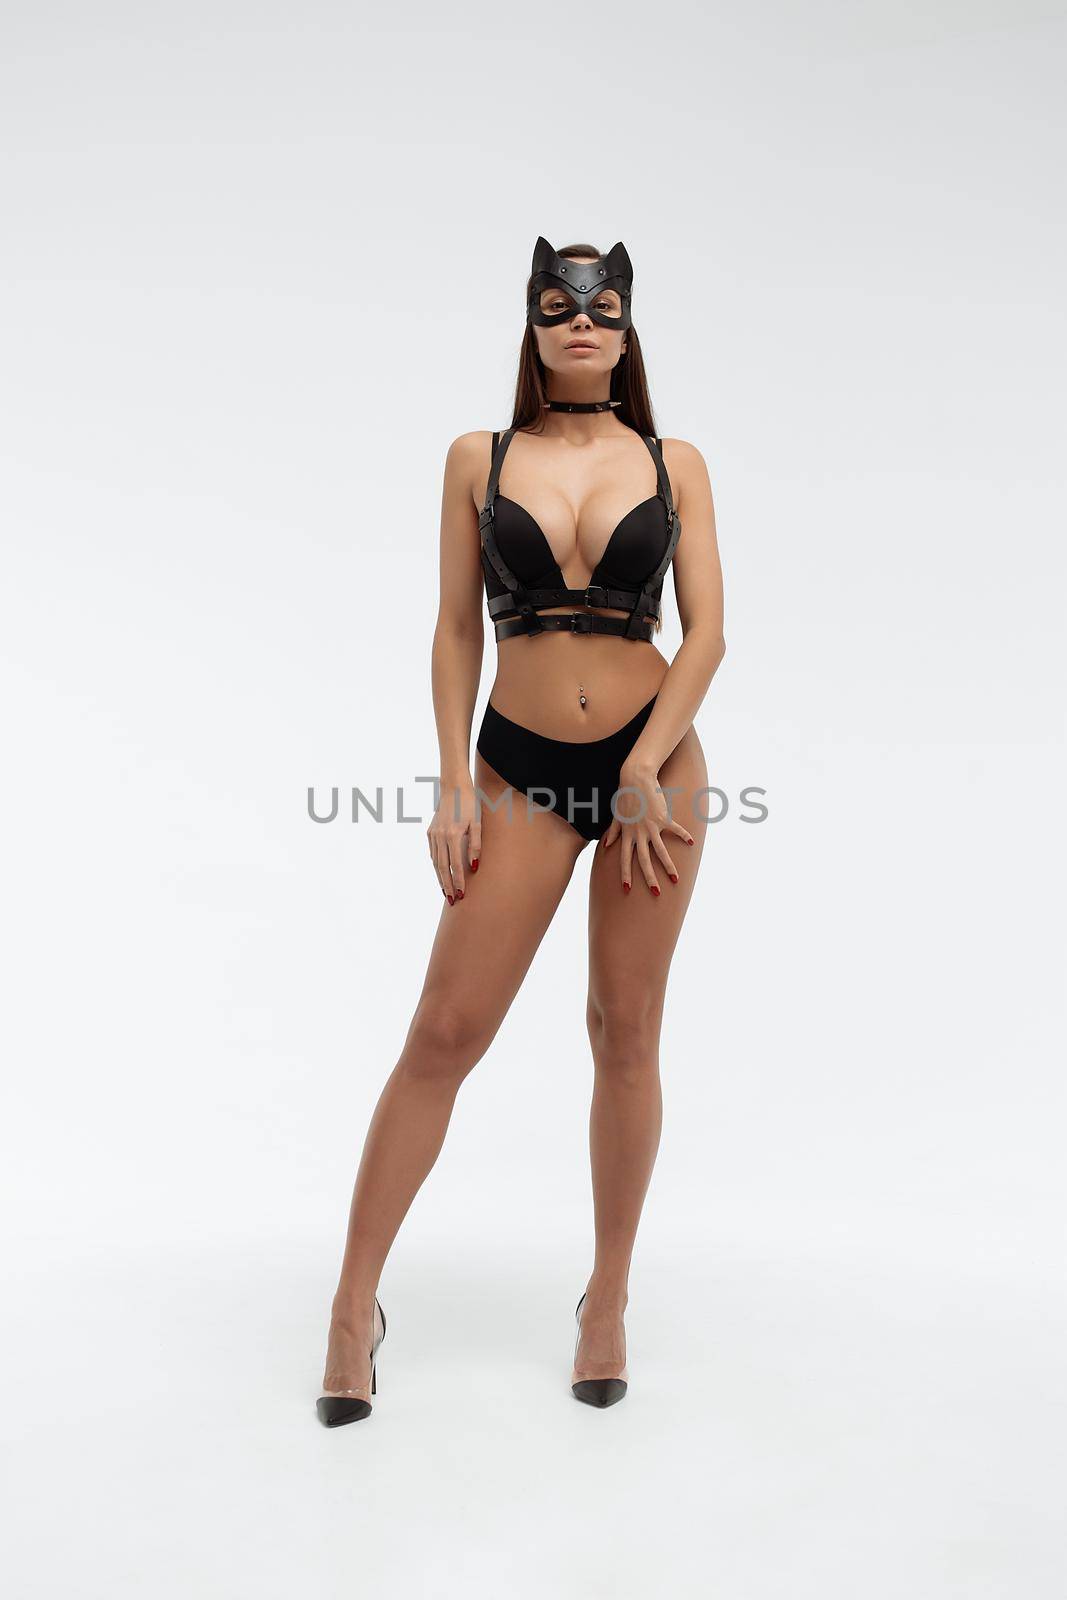 Slim seductive female wearing black mask and sexy underwear standing with hands on waist on white background and looking at camera